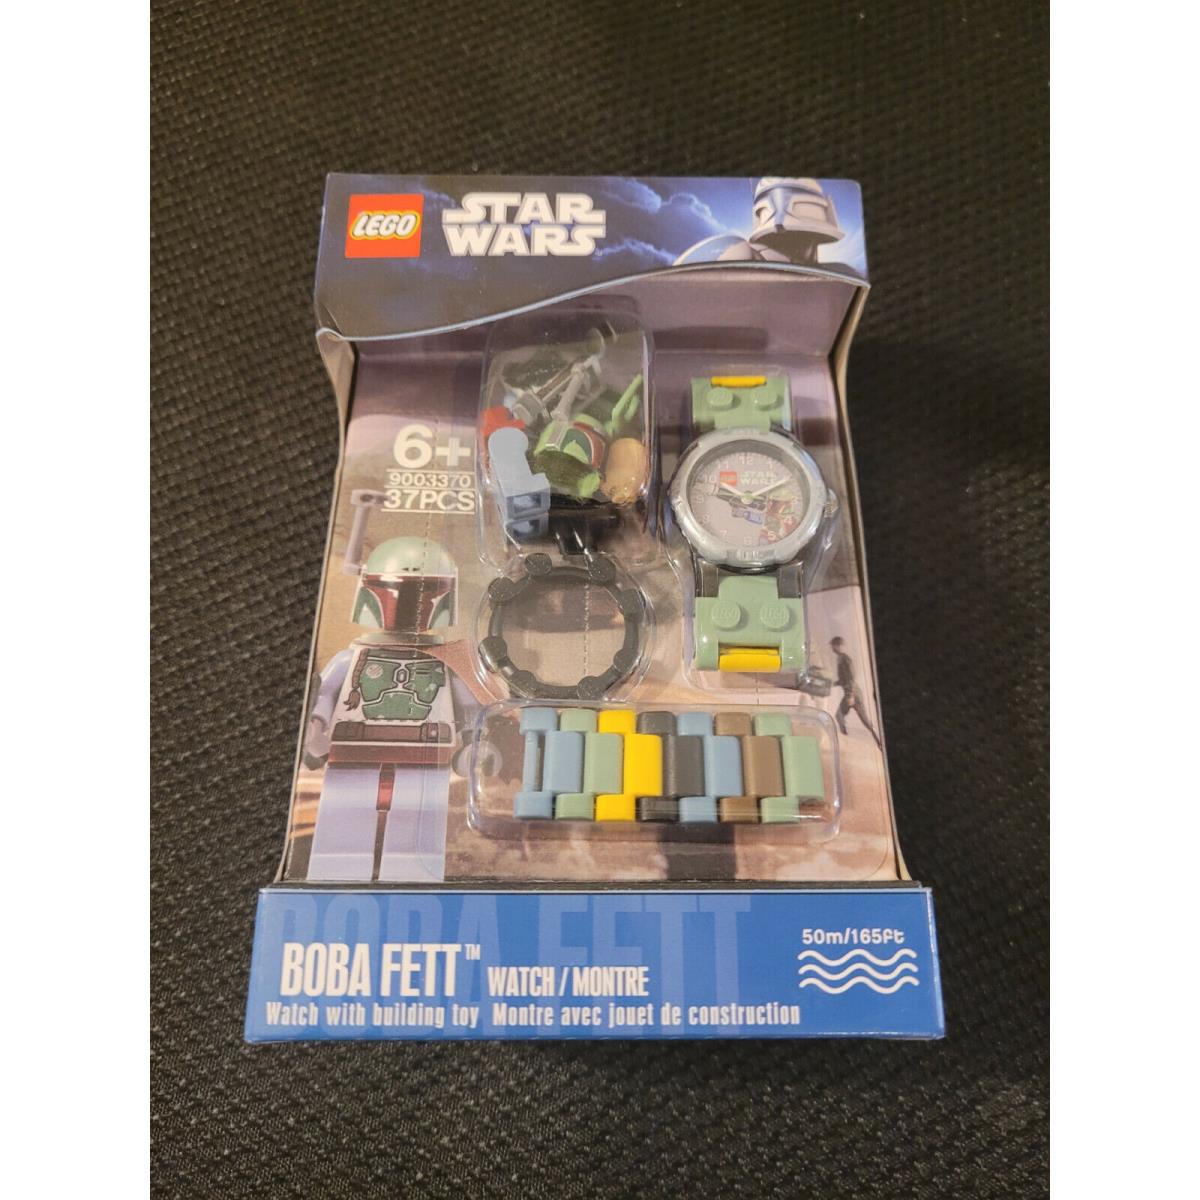 Lego - Star Wars Boba Fett Watch with Minifigure - with